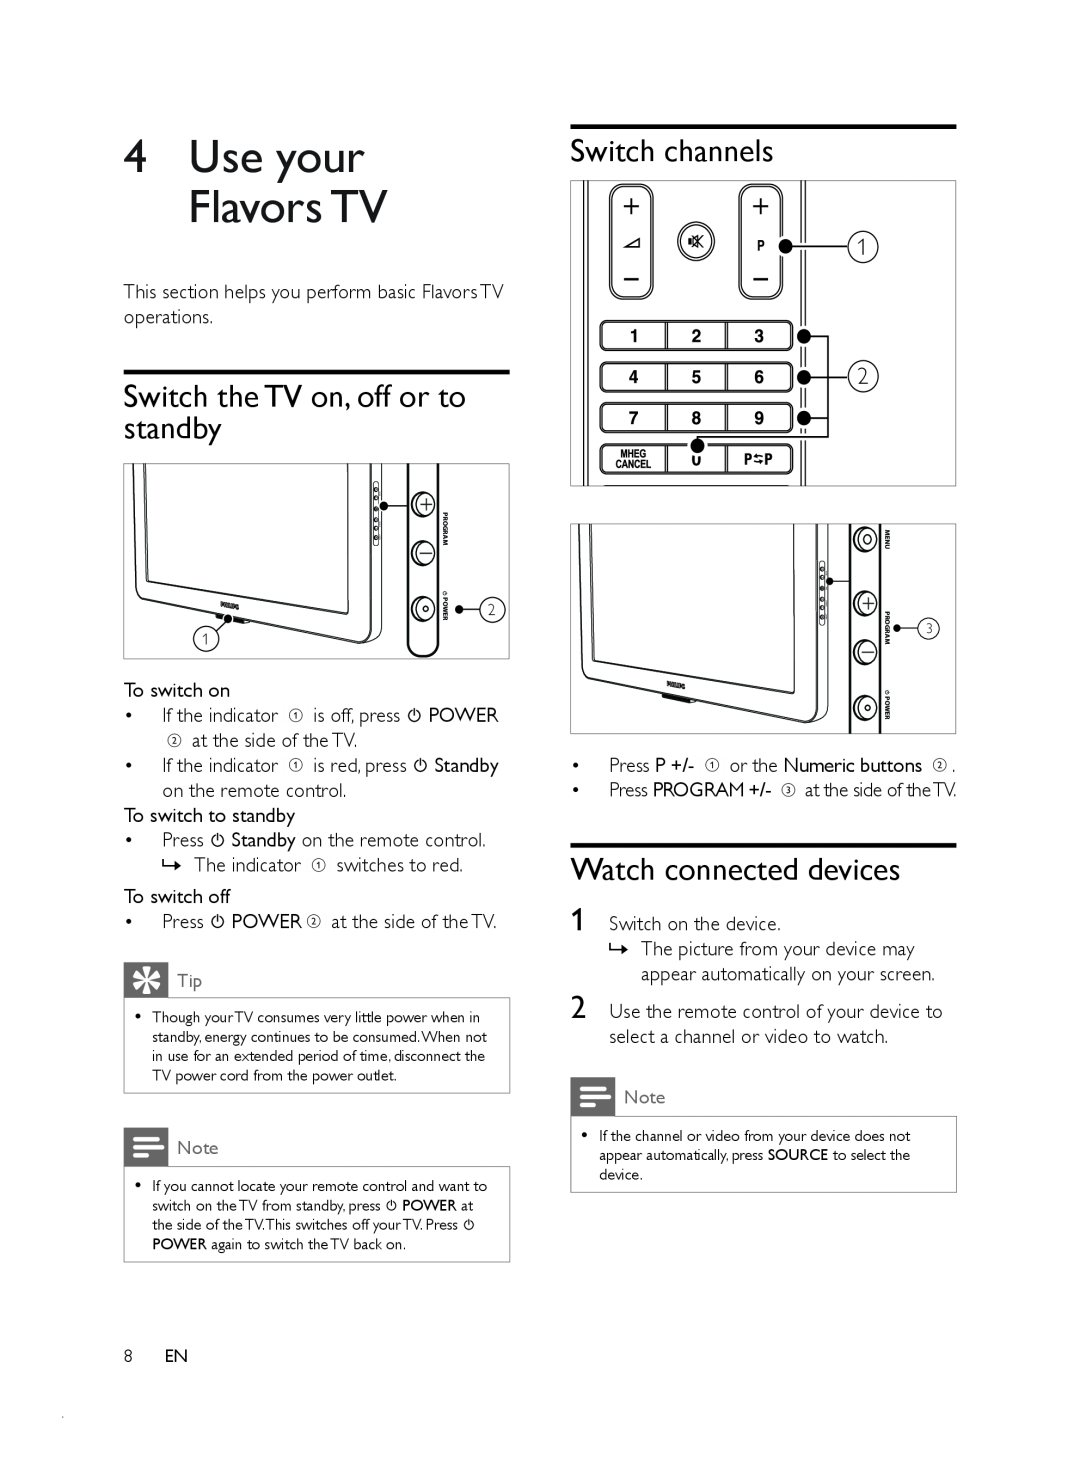 Philips 22PFL6403D/12 Switch the TV on, off or to standby, Switch channels, Watch connected devices, Use your Flavors TV 